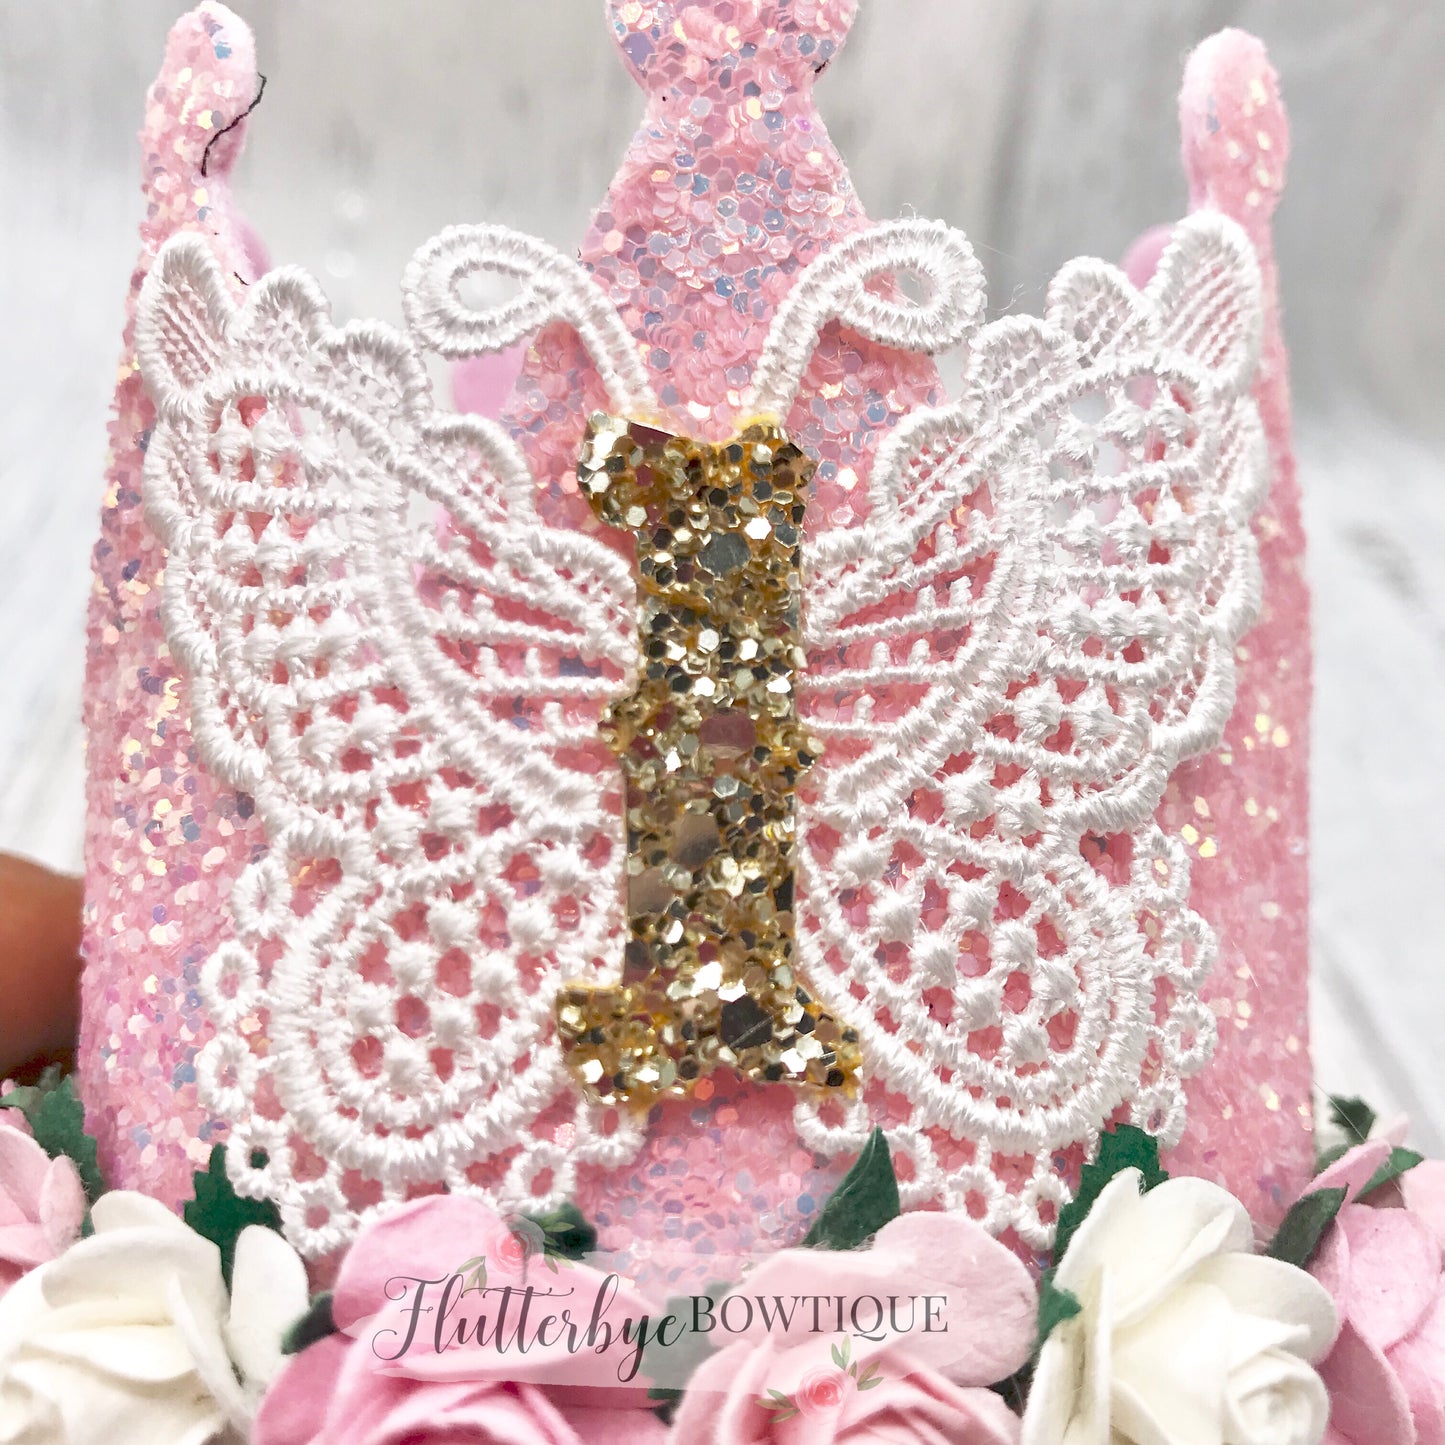 Lace Butterfly Birthday Crown,  Cake Smash Props - Flutterbye Bowtique